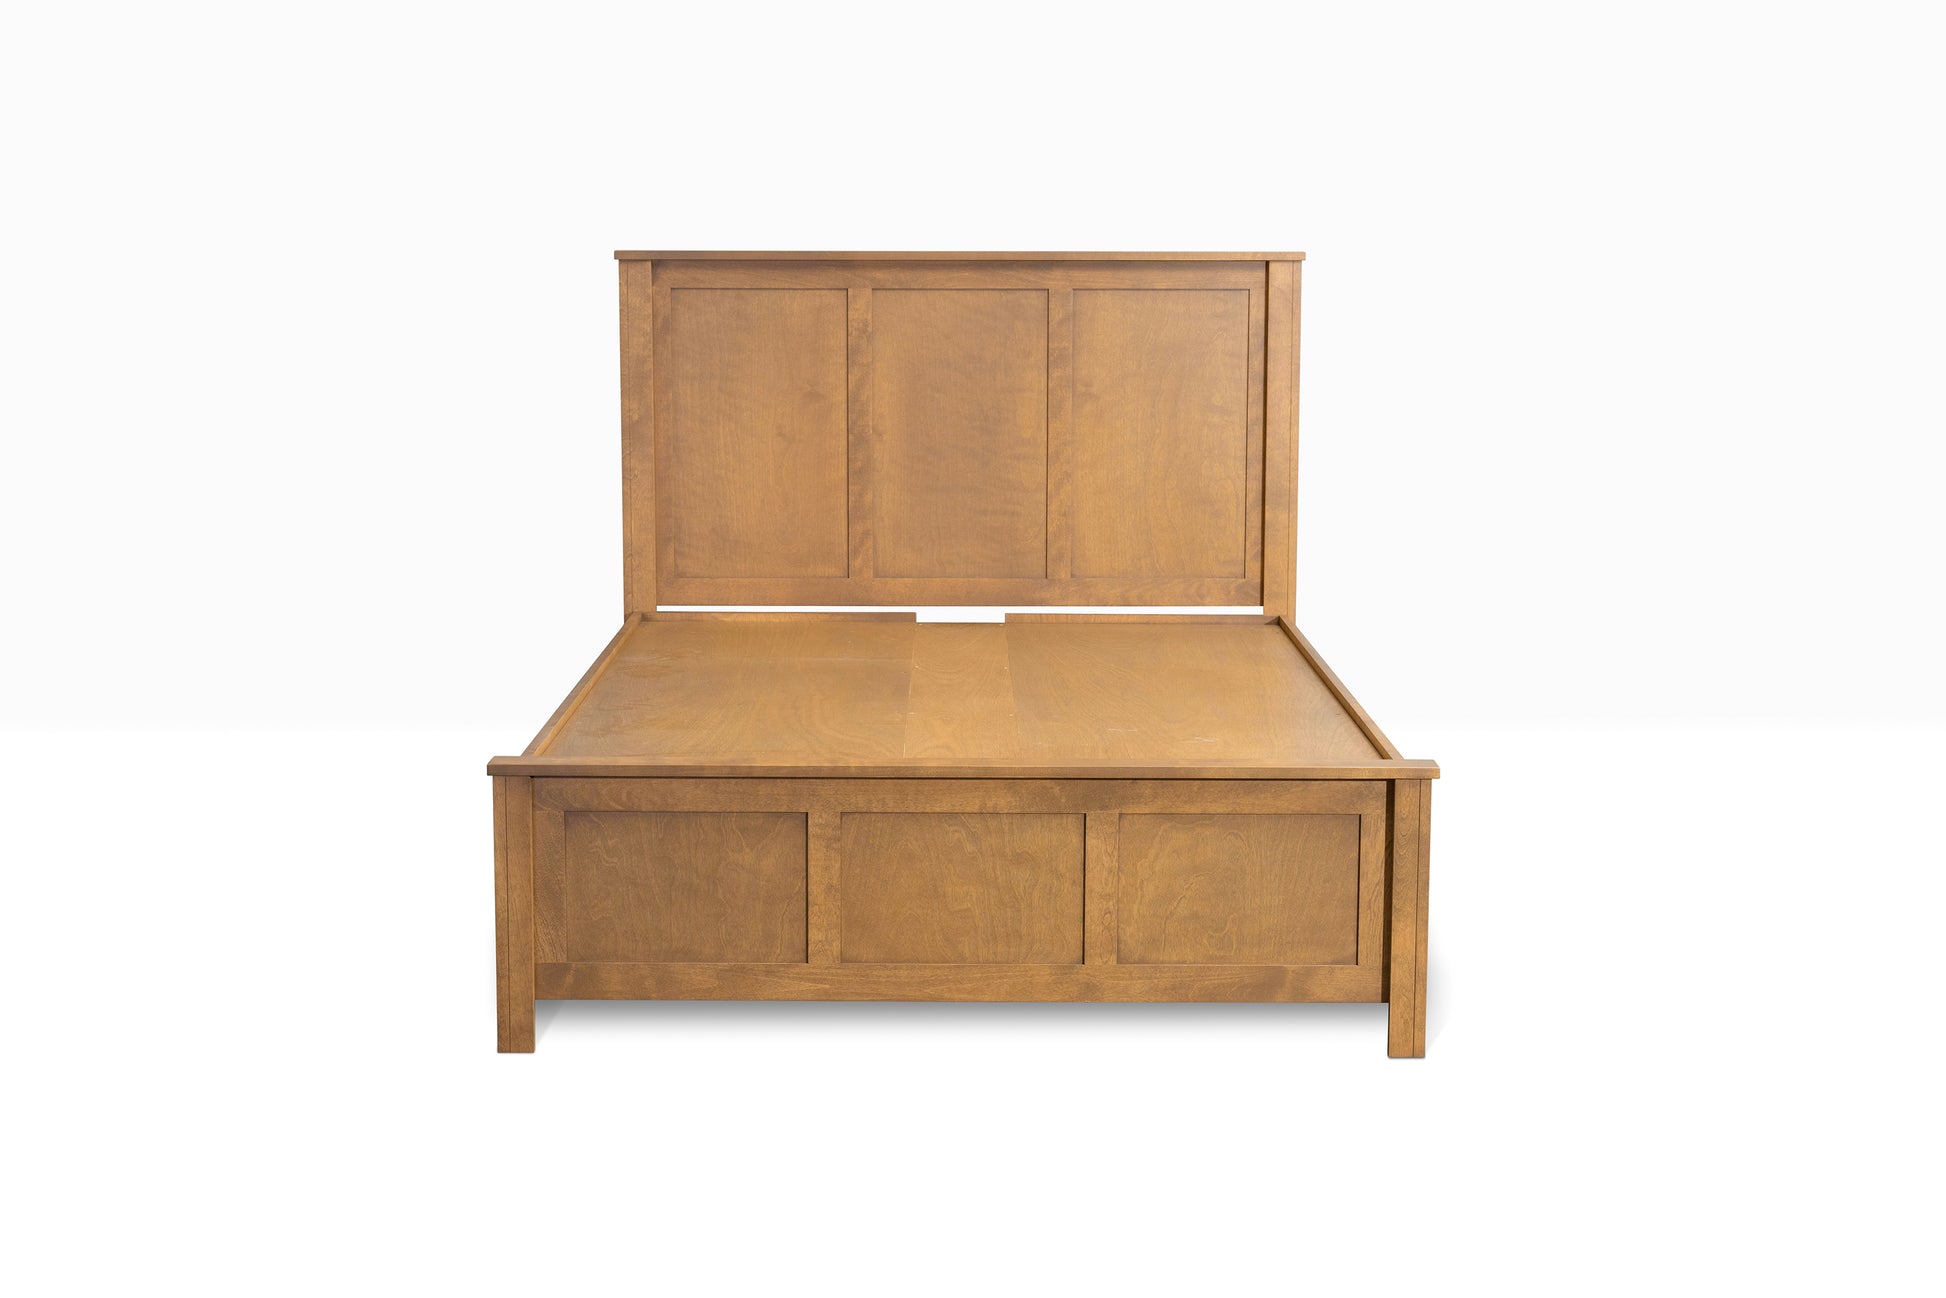 Acadia Tremont Storage Bed with Three Drawers shown with no mattress from the front in Early American finish.